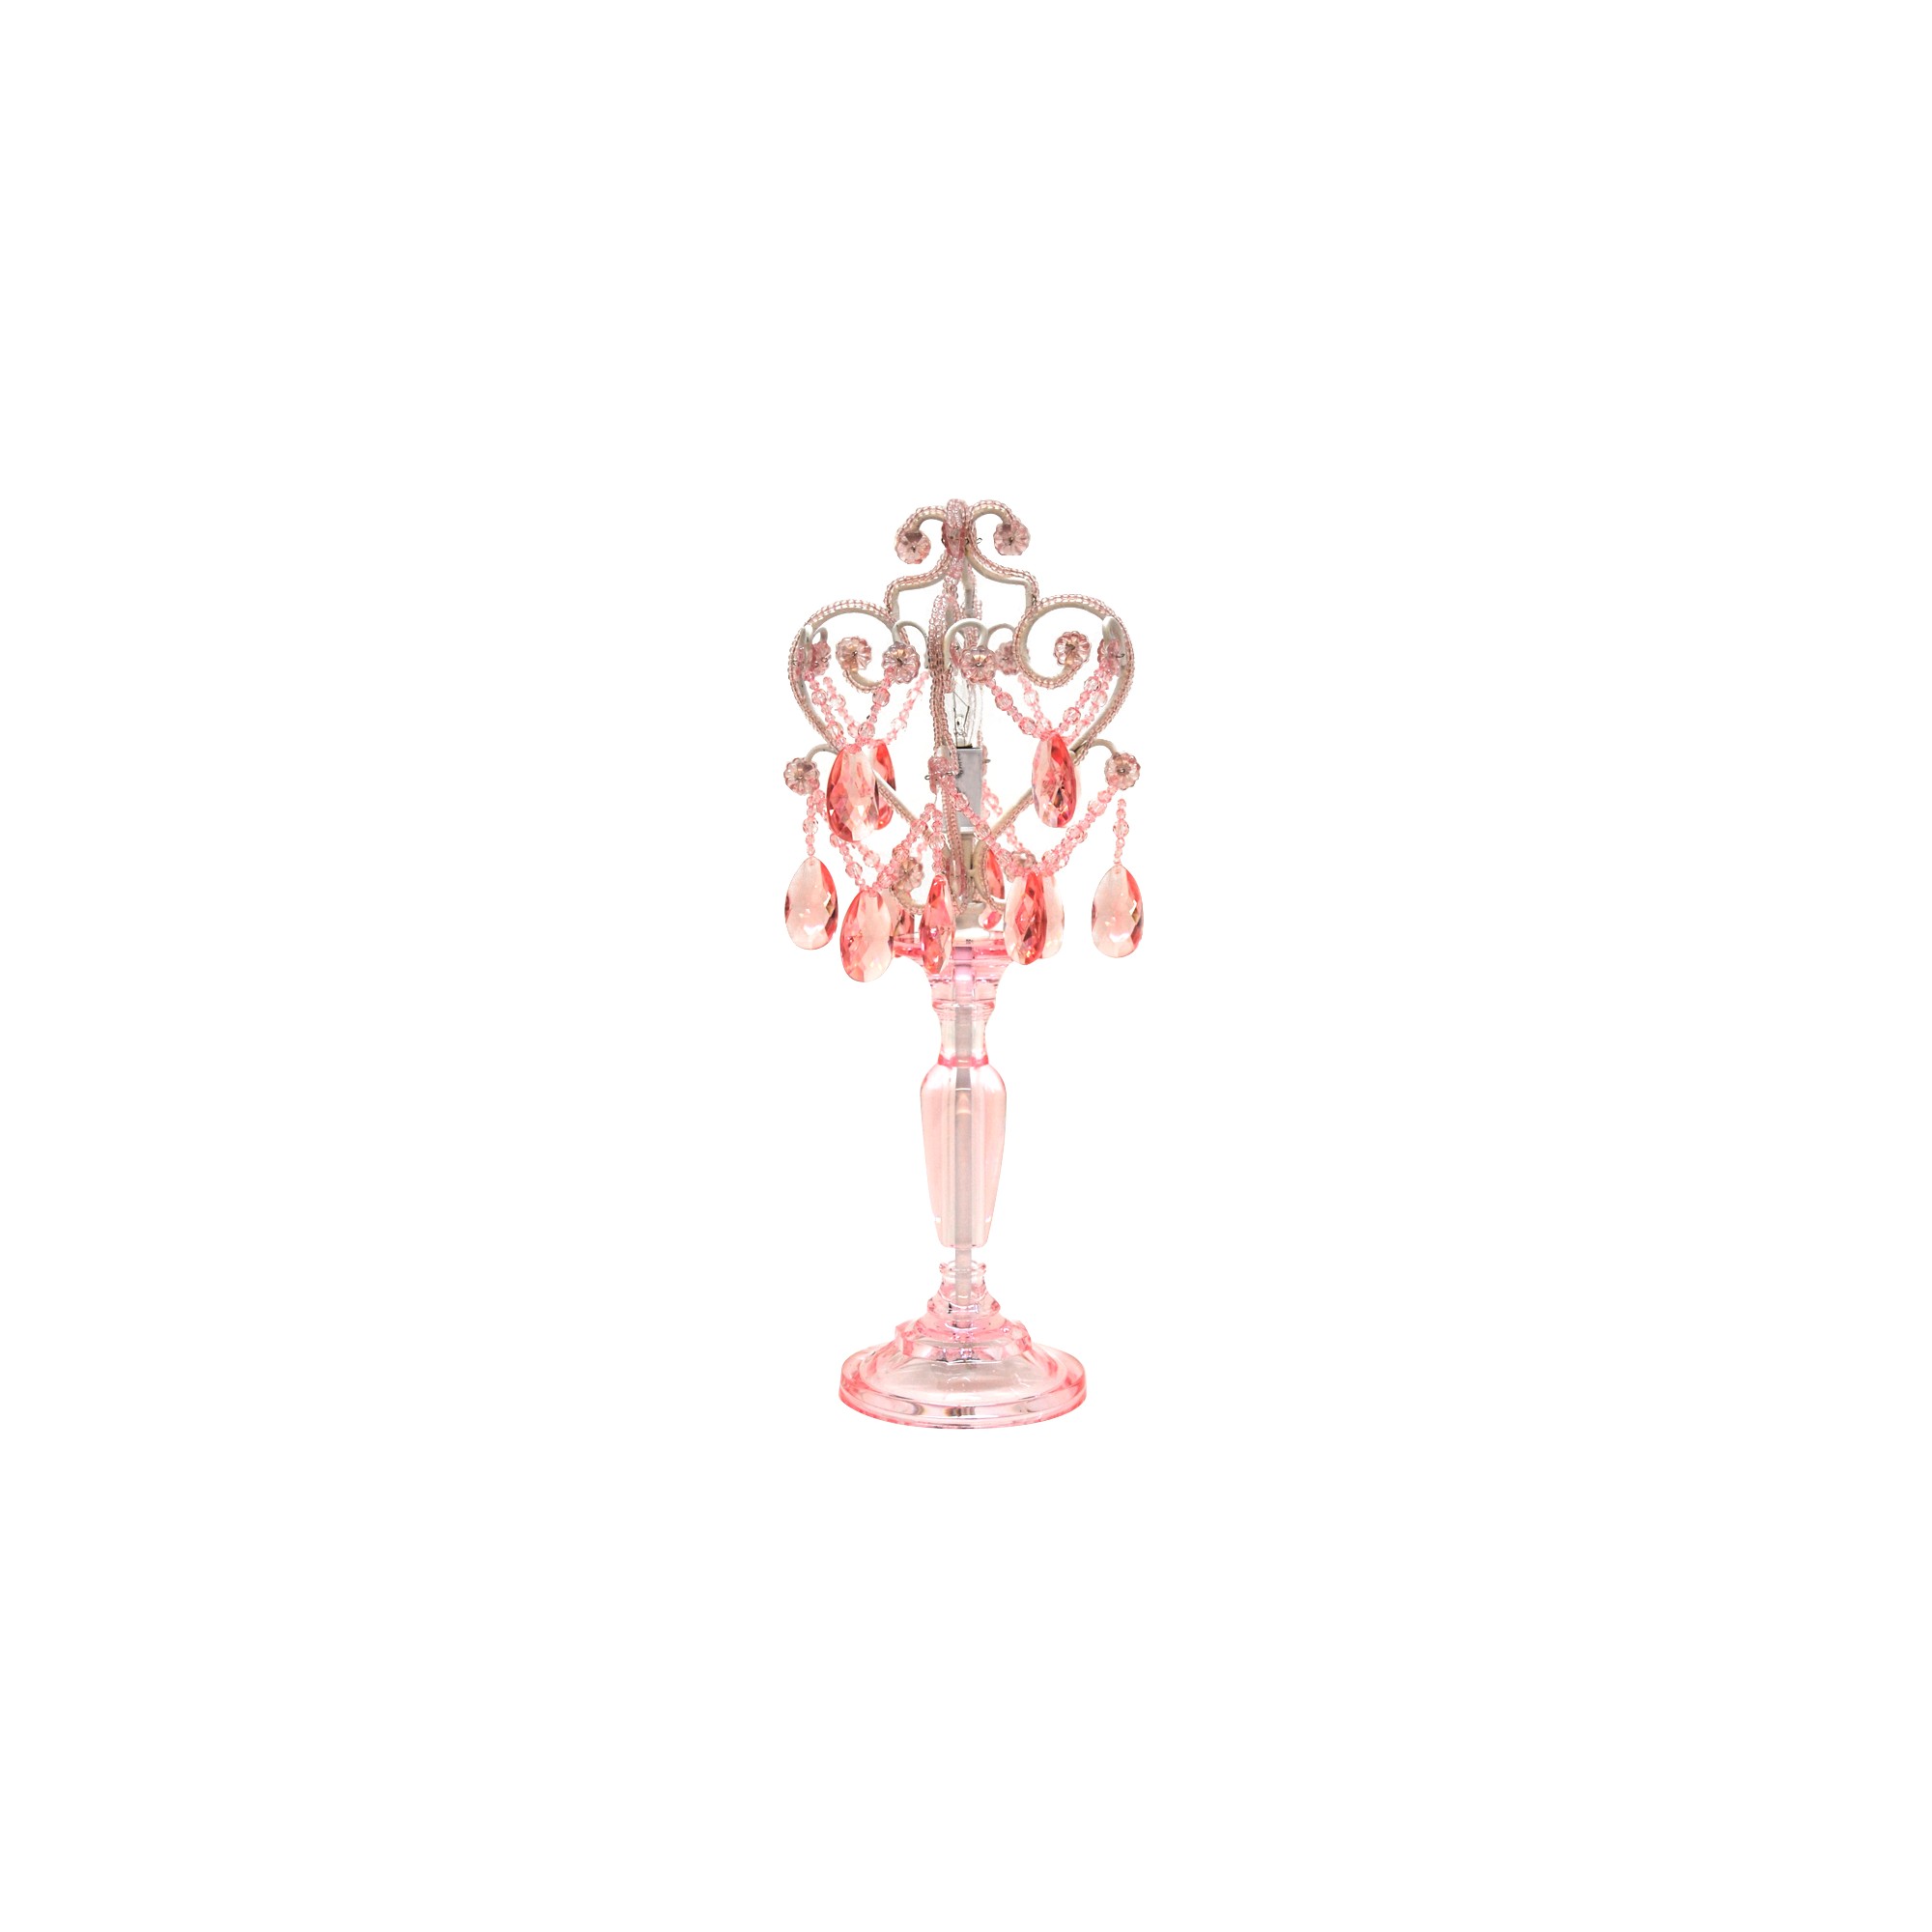 Tadpoles Chandelier Table Lamp - Pink (Lamp Only), Women's